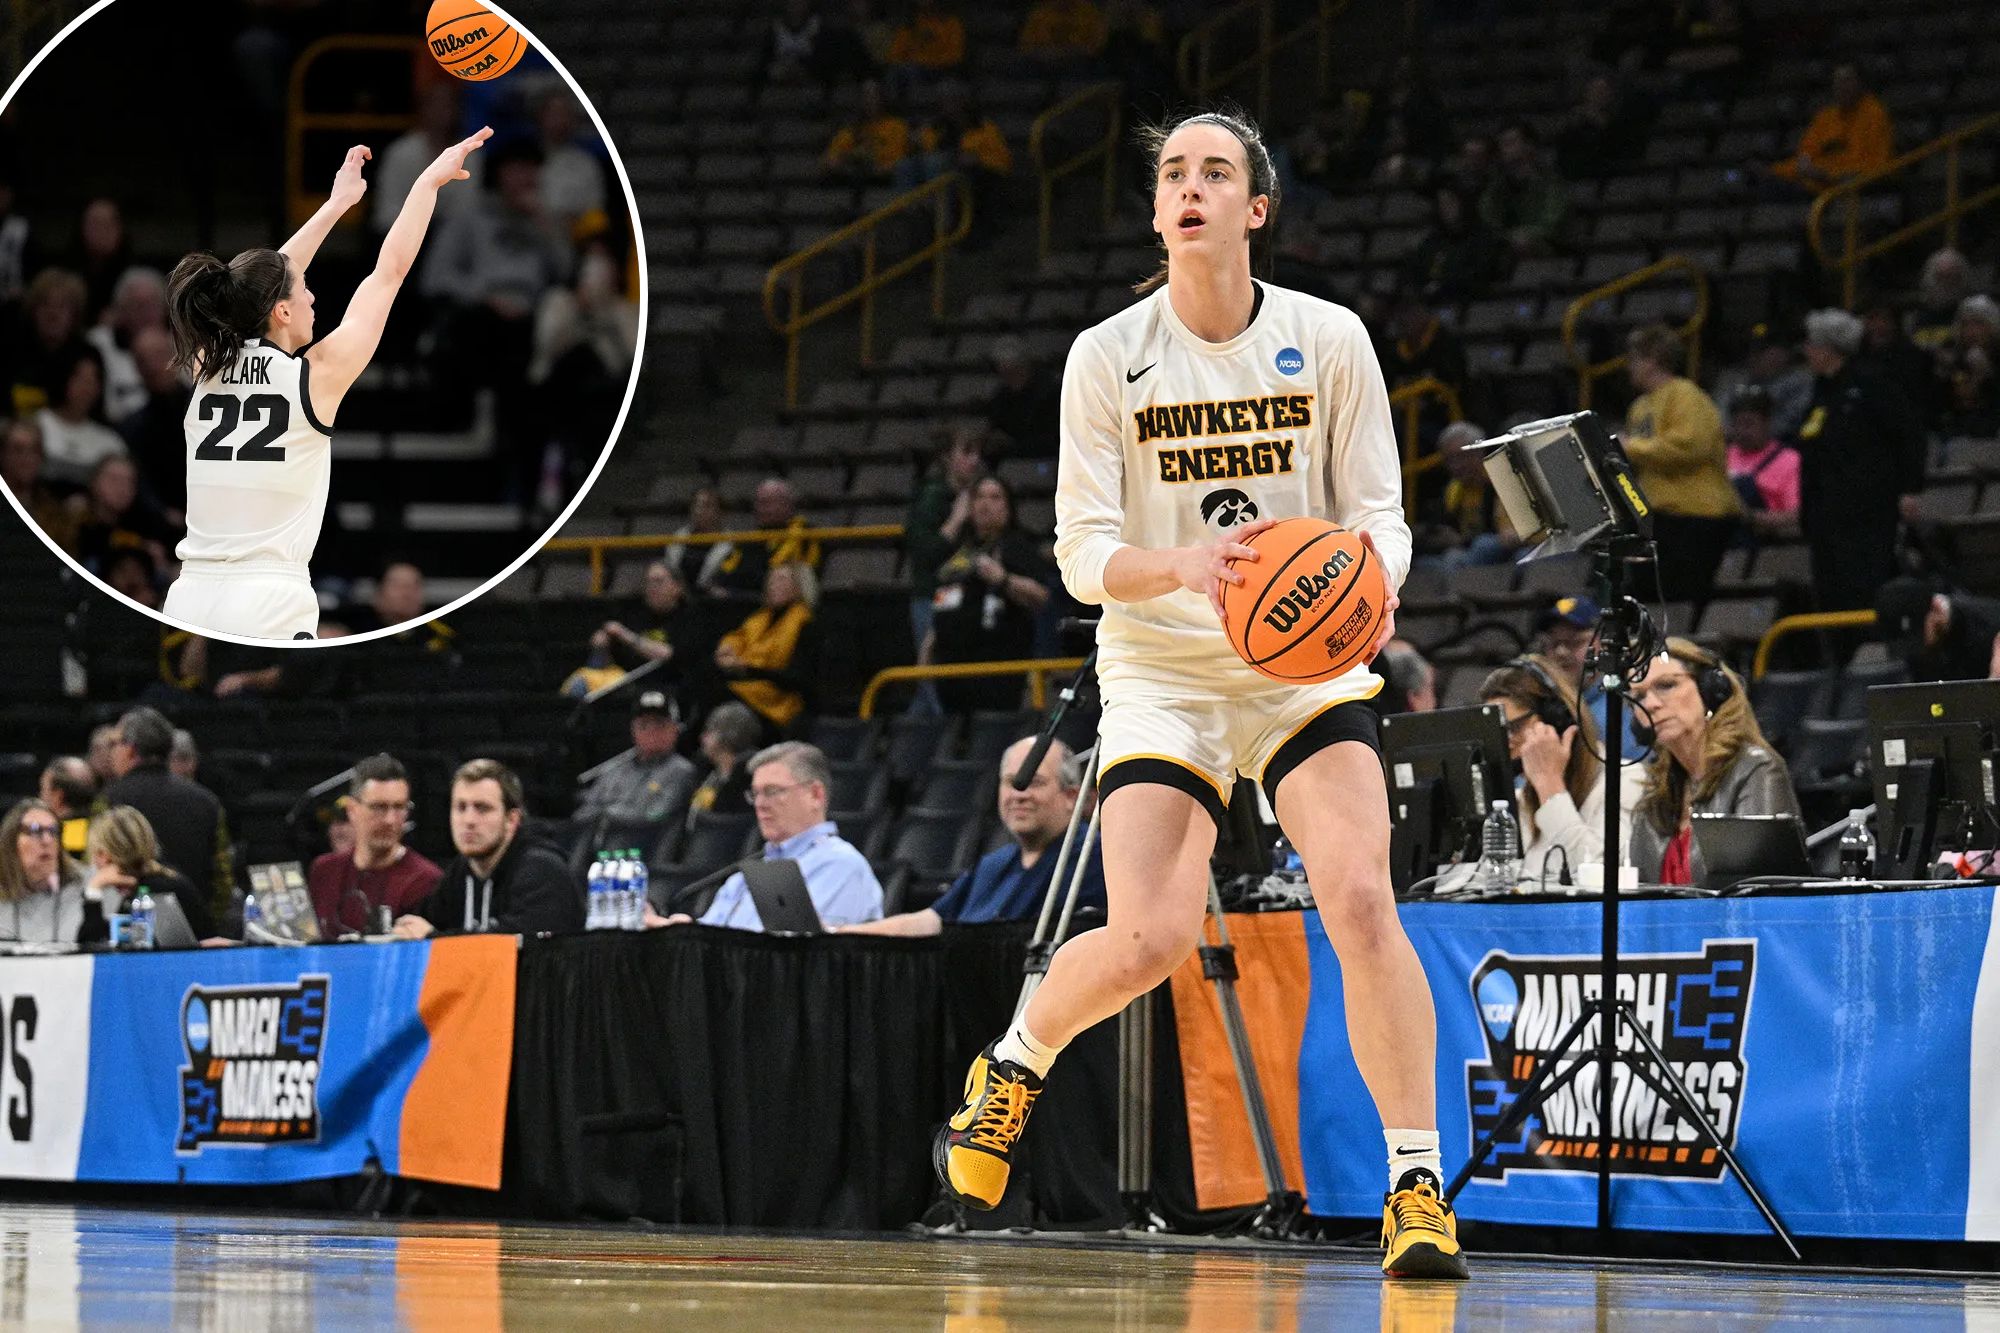 Caitlin Clark will likely be the No. 1 overall pick in the WNBA draft Monday.